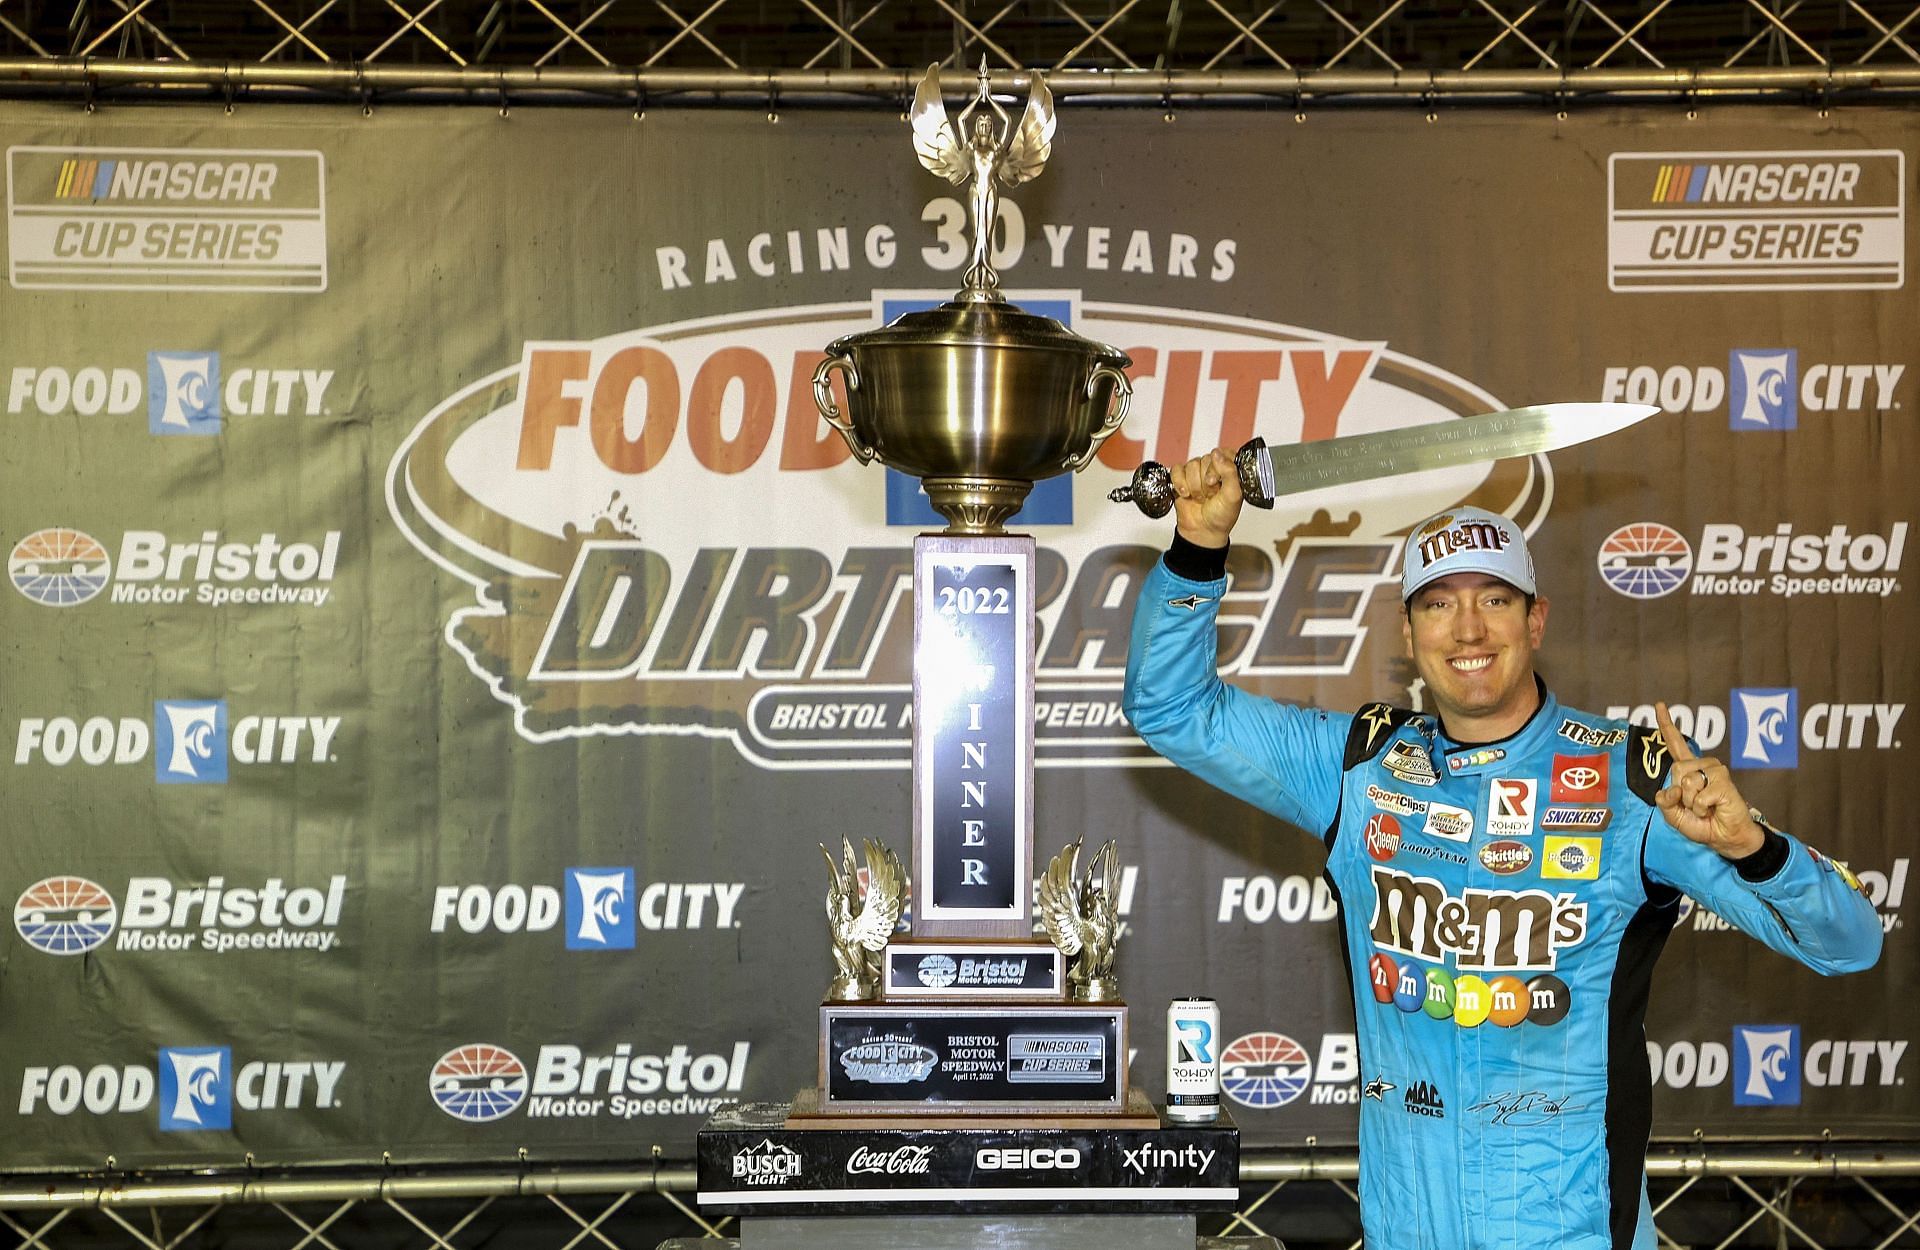 Kyle Busch celebrates in victory lane after winning the NASCAR Cup Series Food City Dirt Race at Bristol Motor Speedway